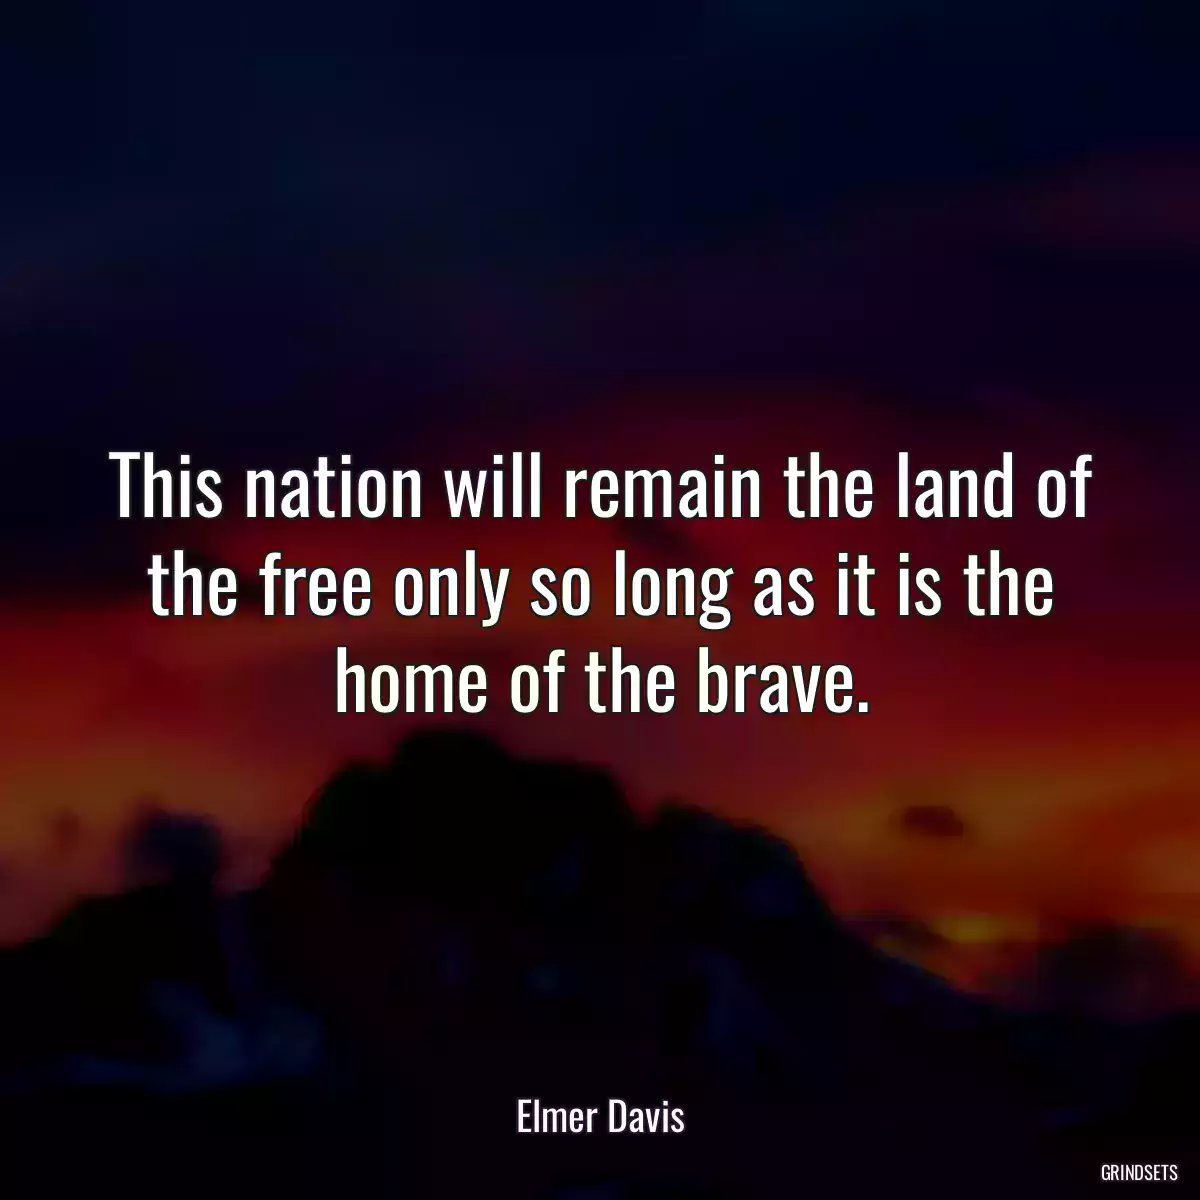 This nation will remain the land of the free only so long as it is the home of the brave.